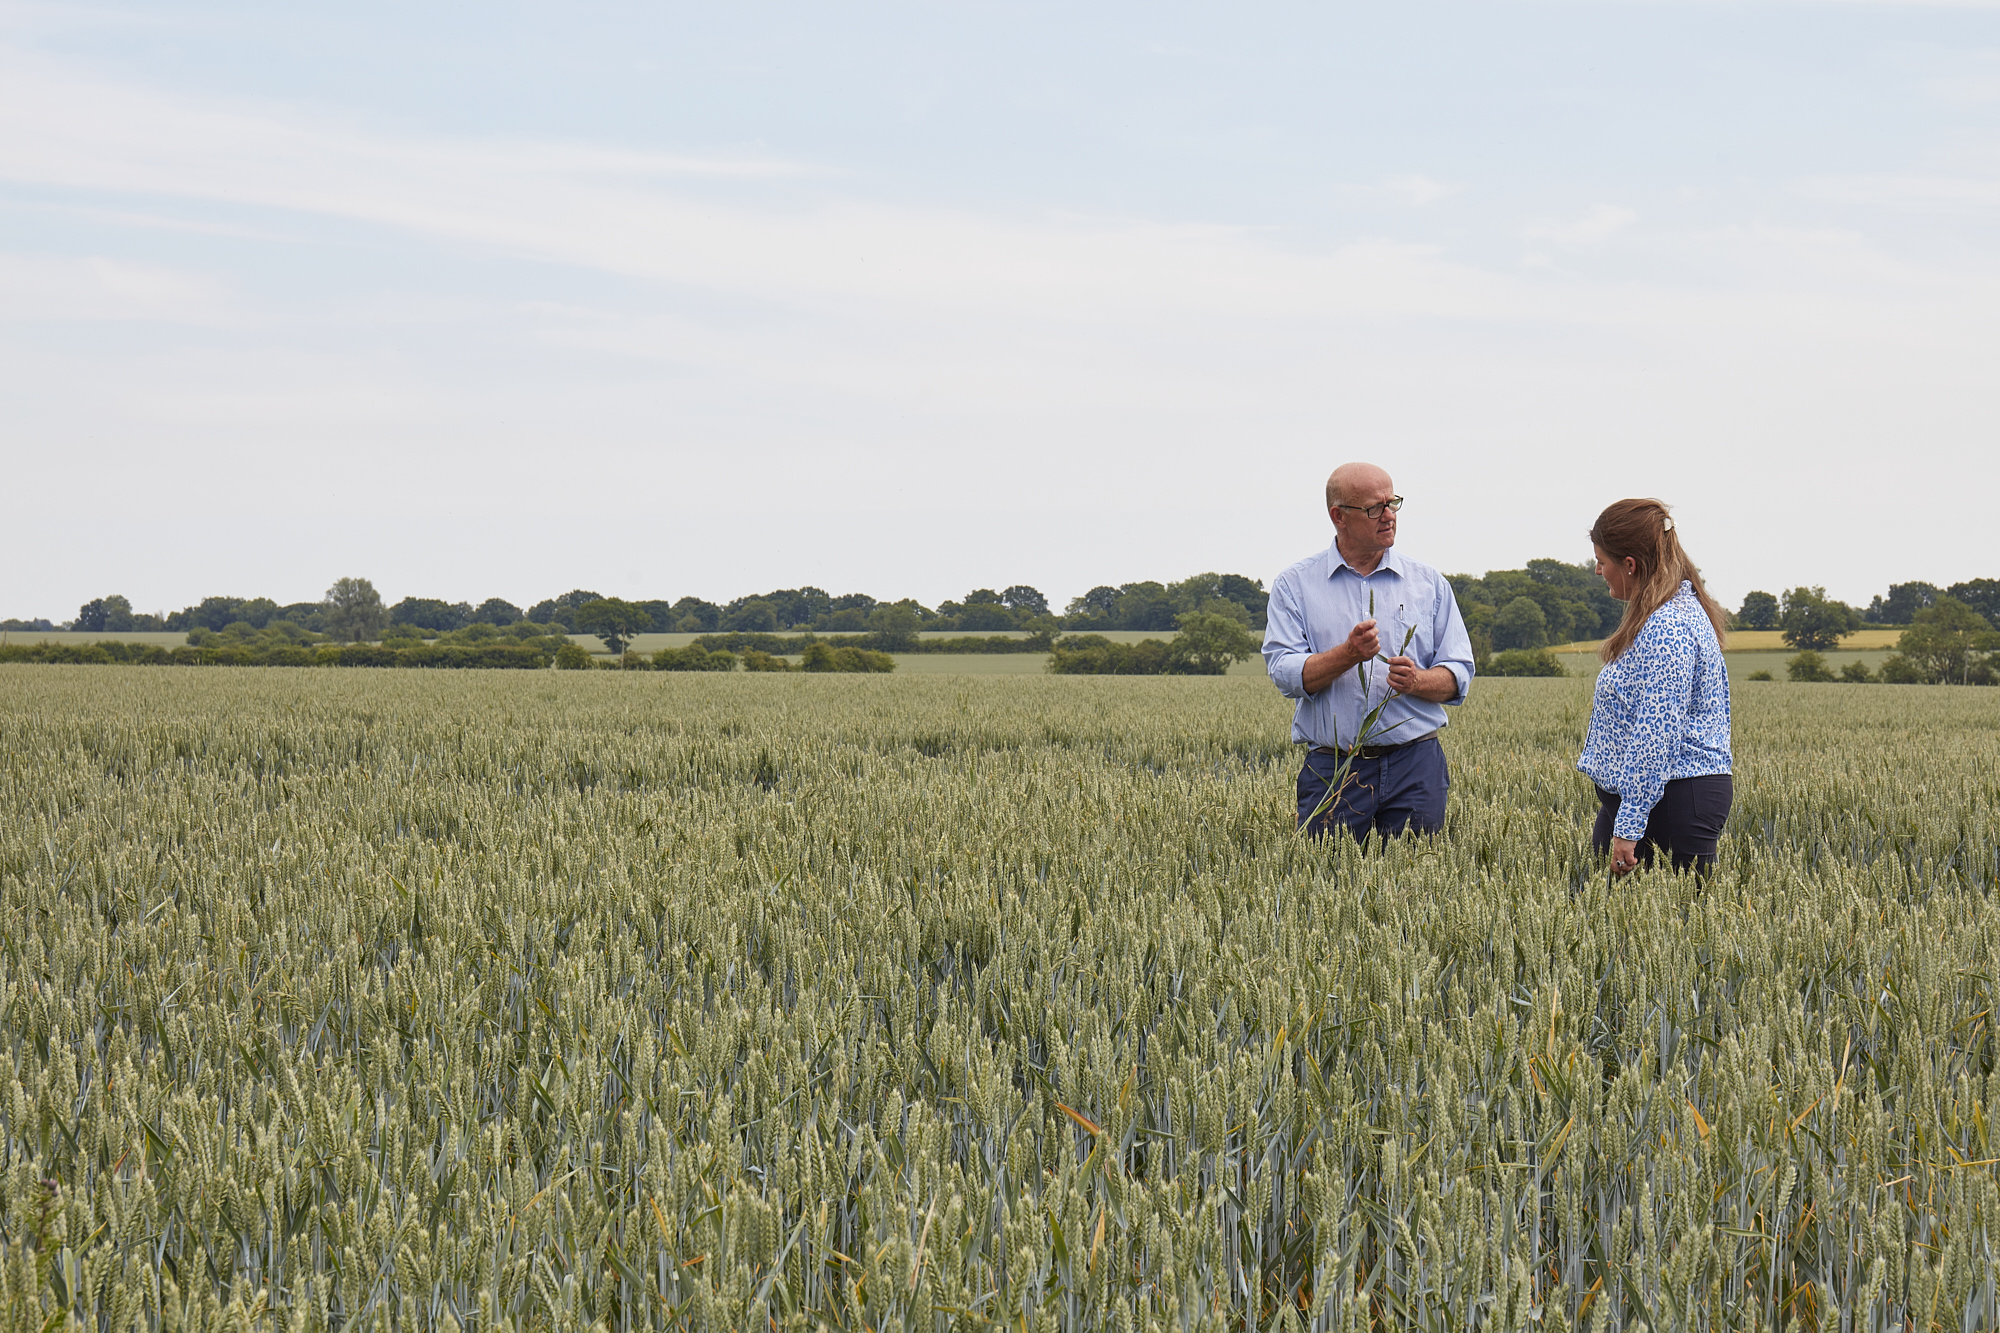 Breaking free from the input-output price dilemma: a guide for arable farmers